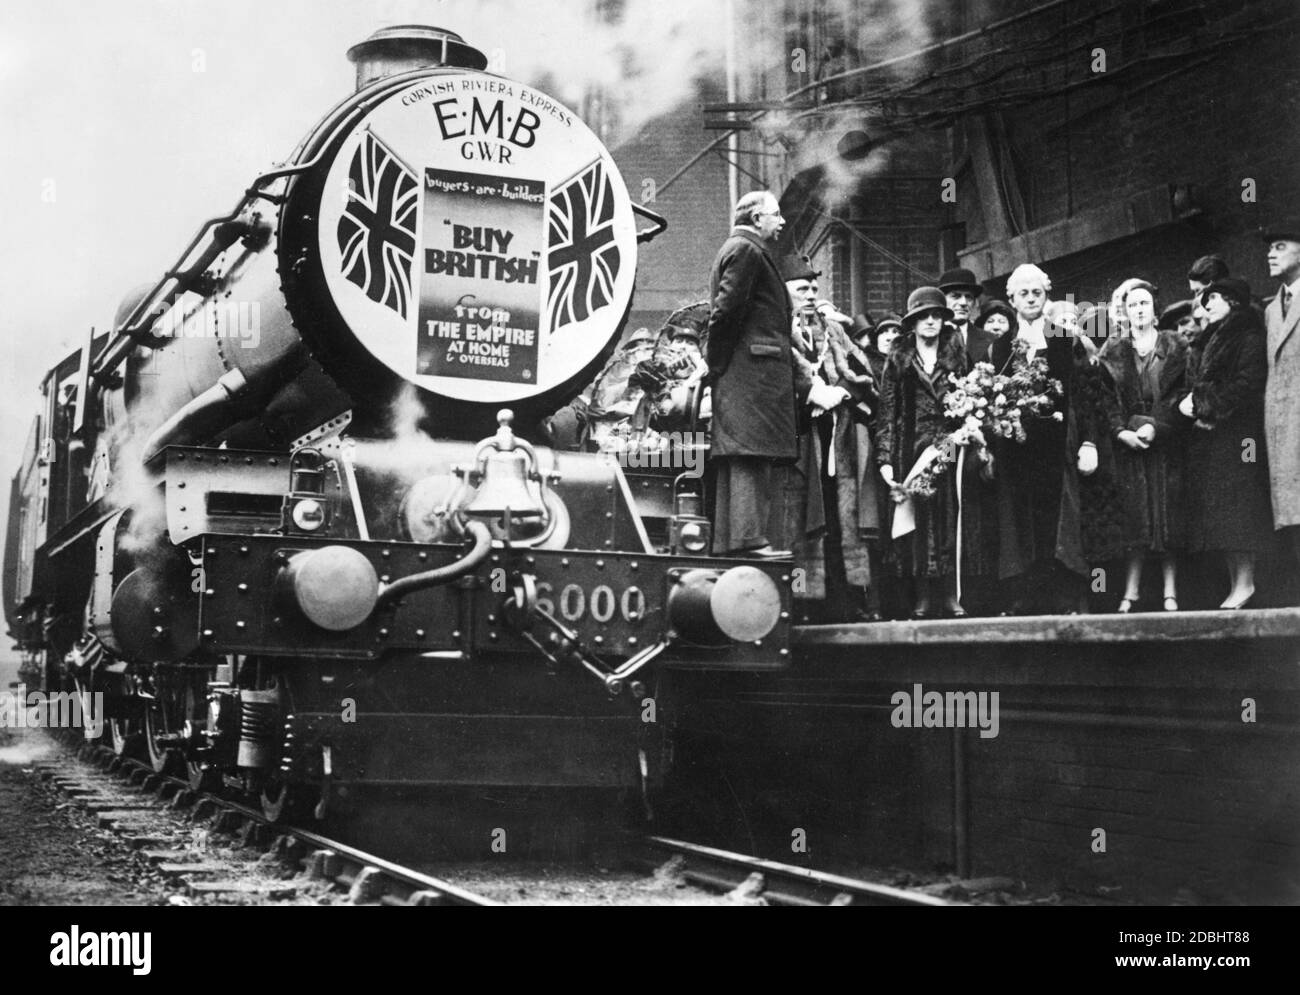 Ceremonial departure of a train calling for the purchase of British goods in Great Britain and from the colonies by the Minister for the Colonies, James Henry Thomas (2nd from left), at Paddington Station in London. Stock Photo